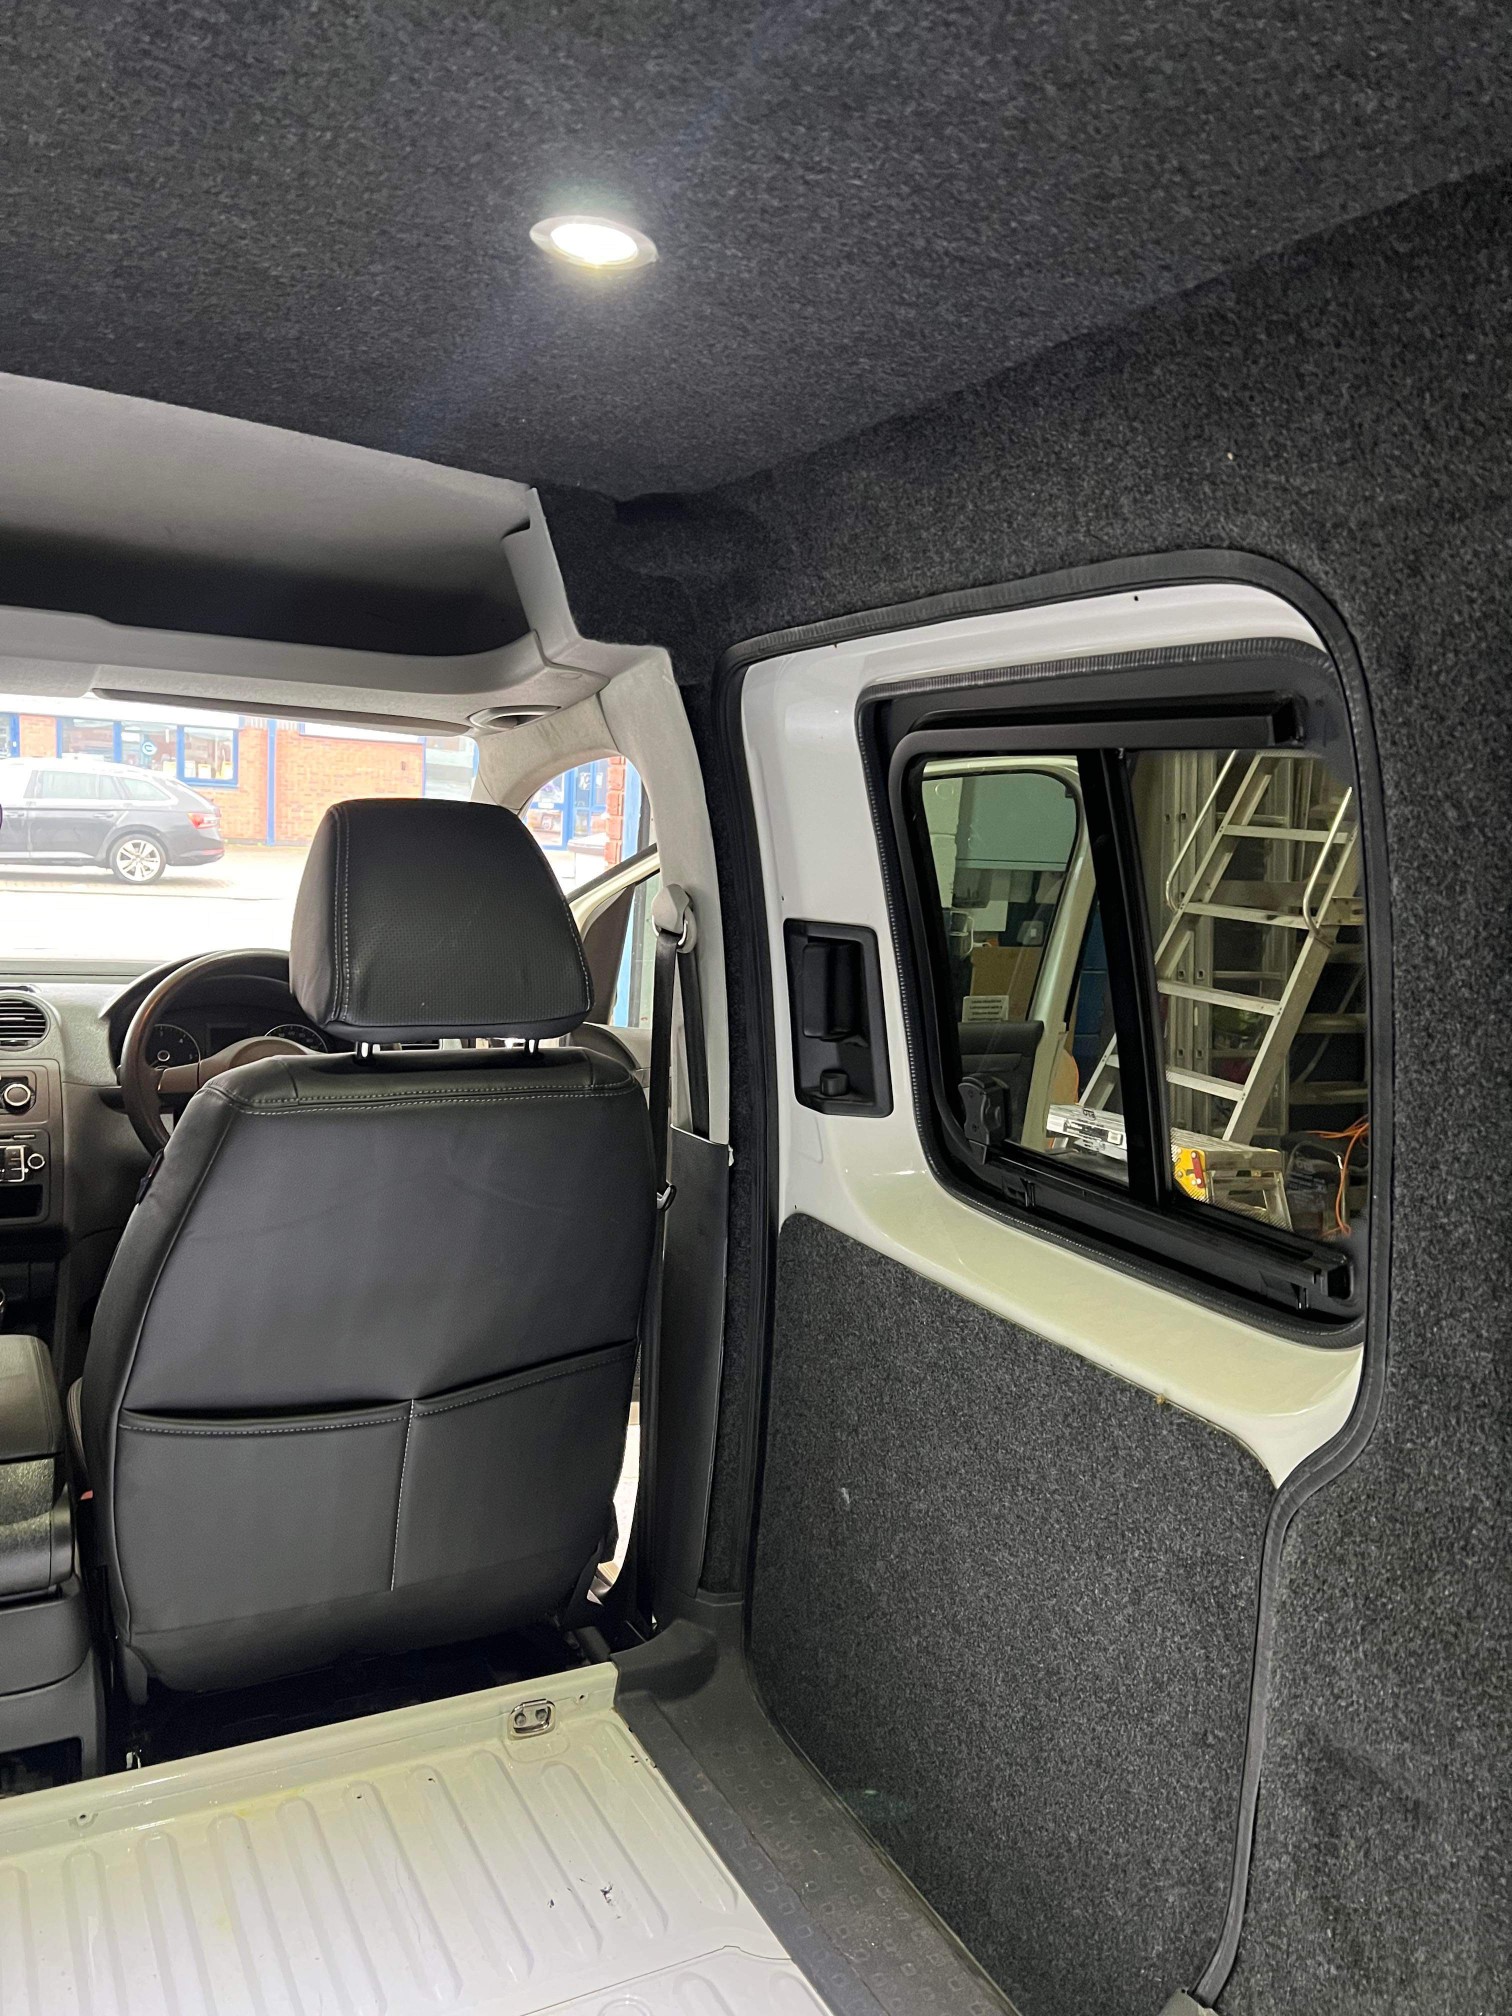 VW Caddy, Windows, insulation, carpet, lights, floor and Altro flooring, fit ( (7)